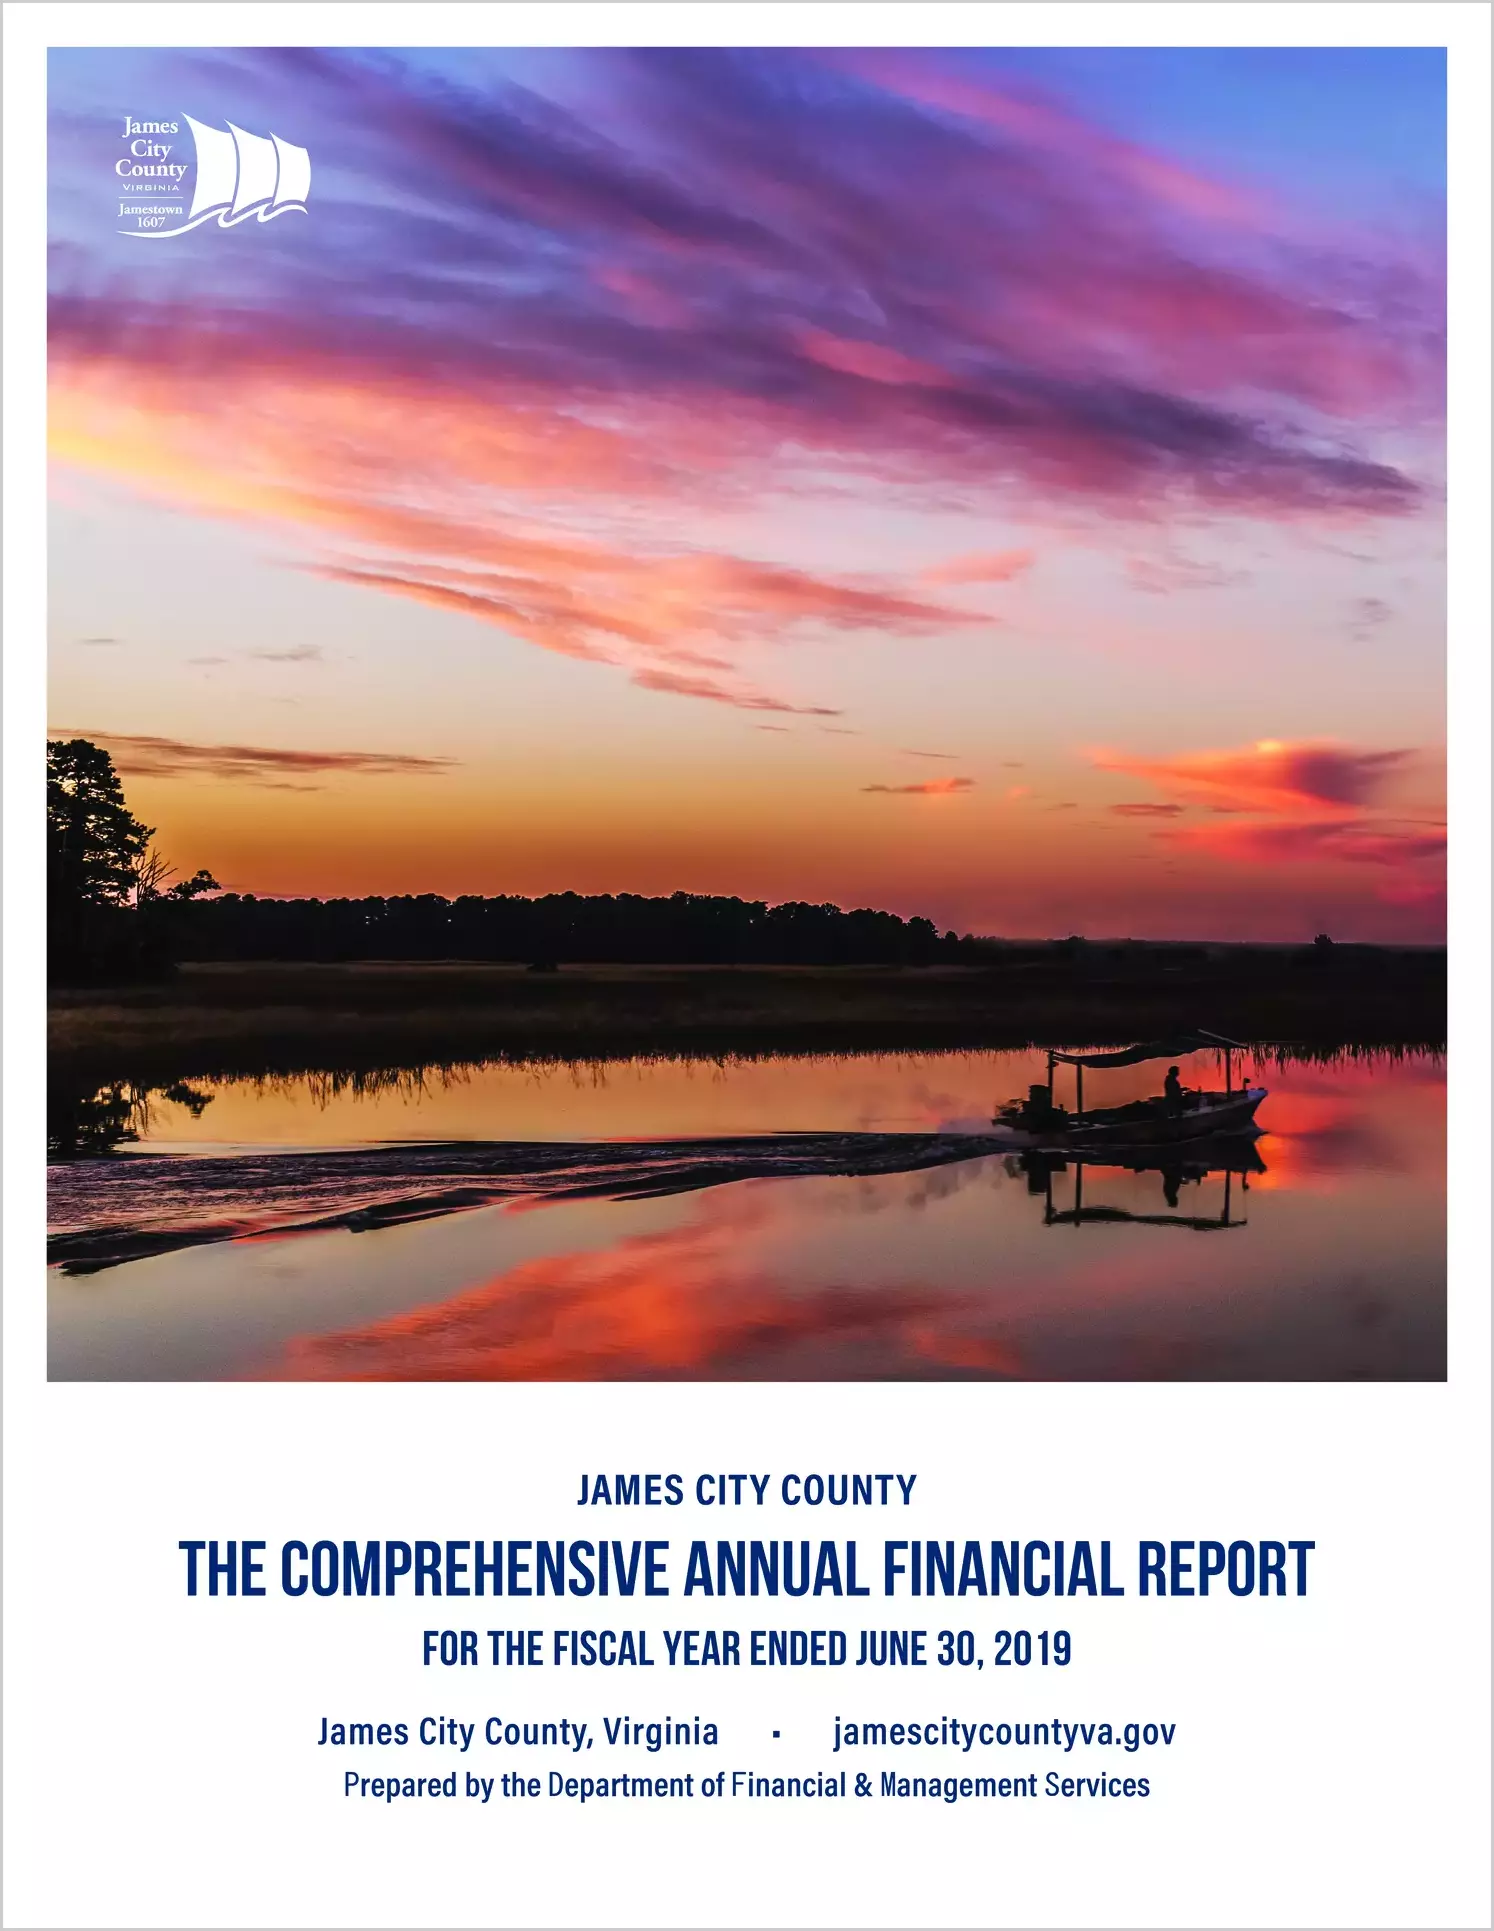 2019 Annual Financial Report for County of James City